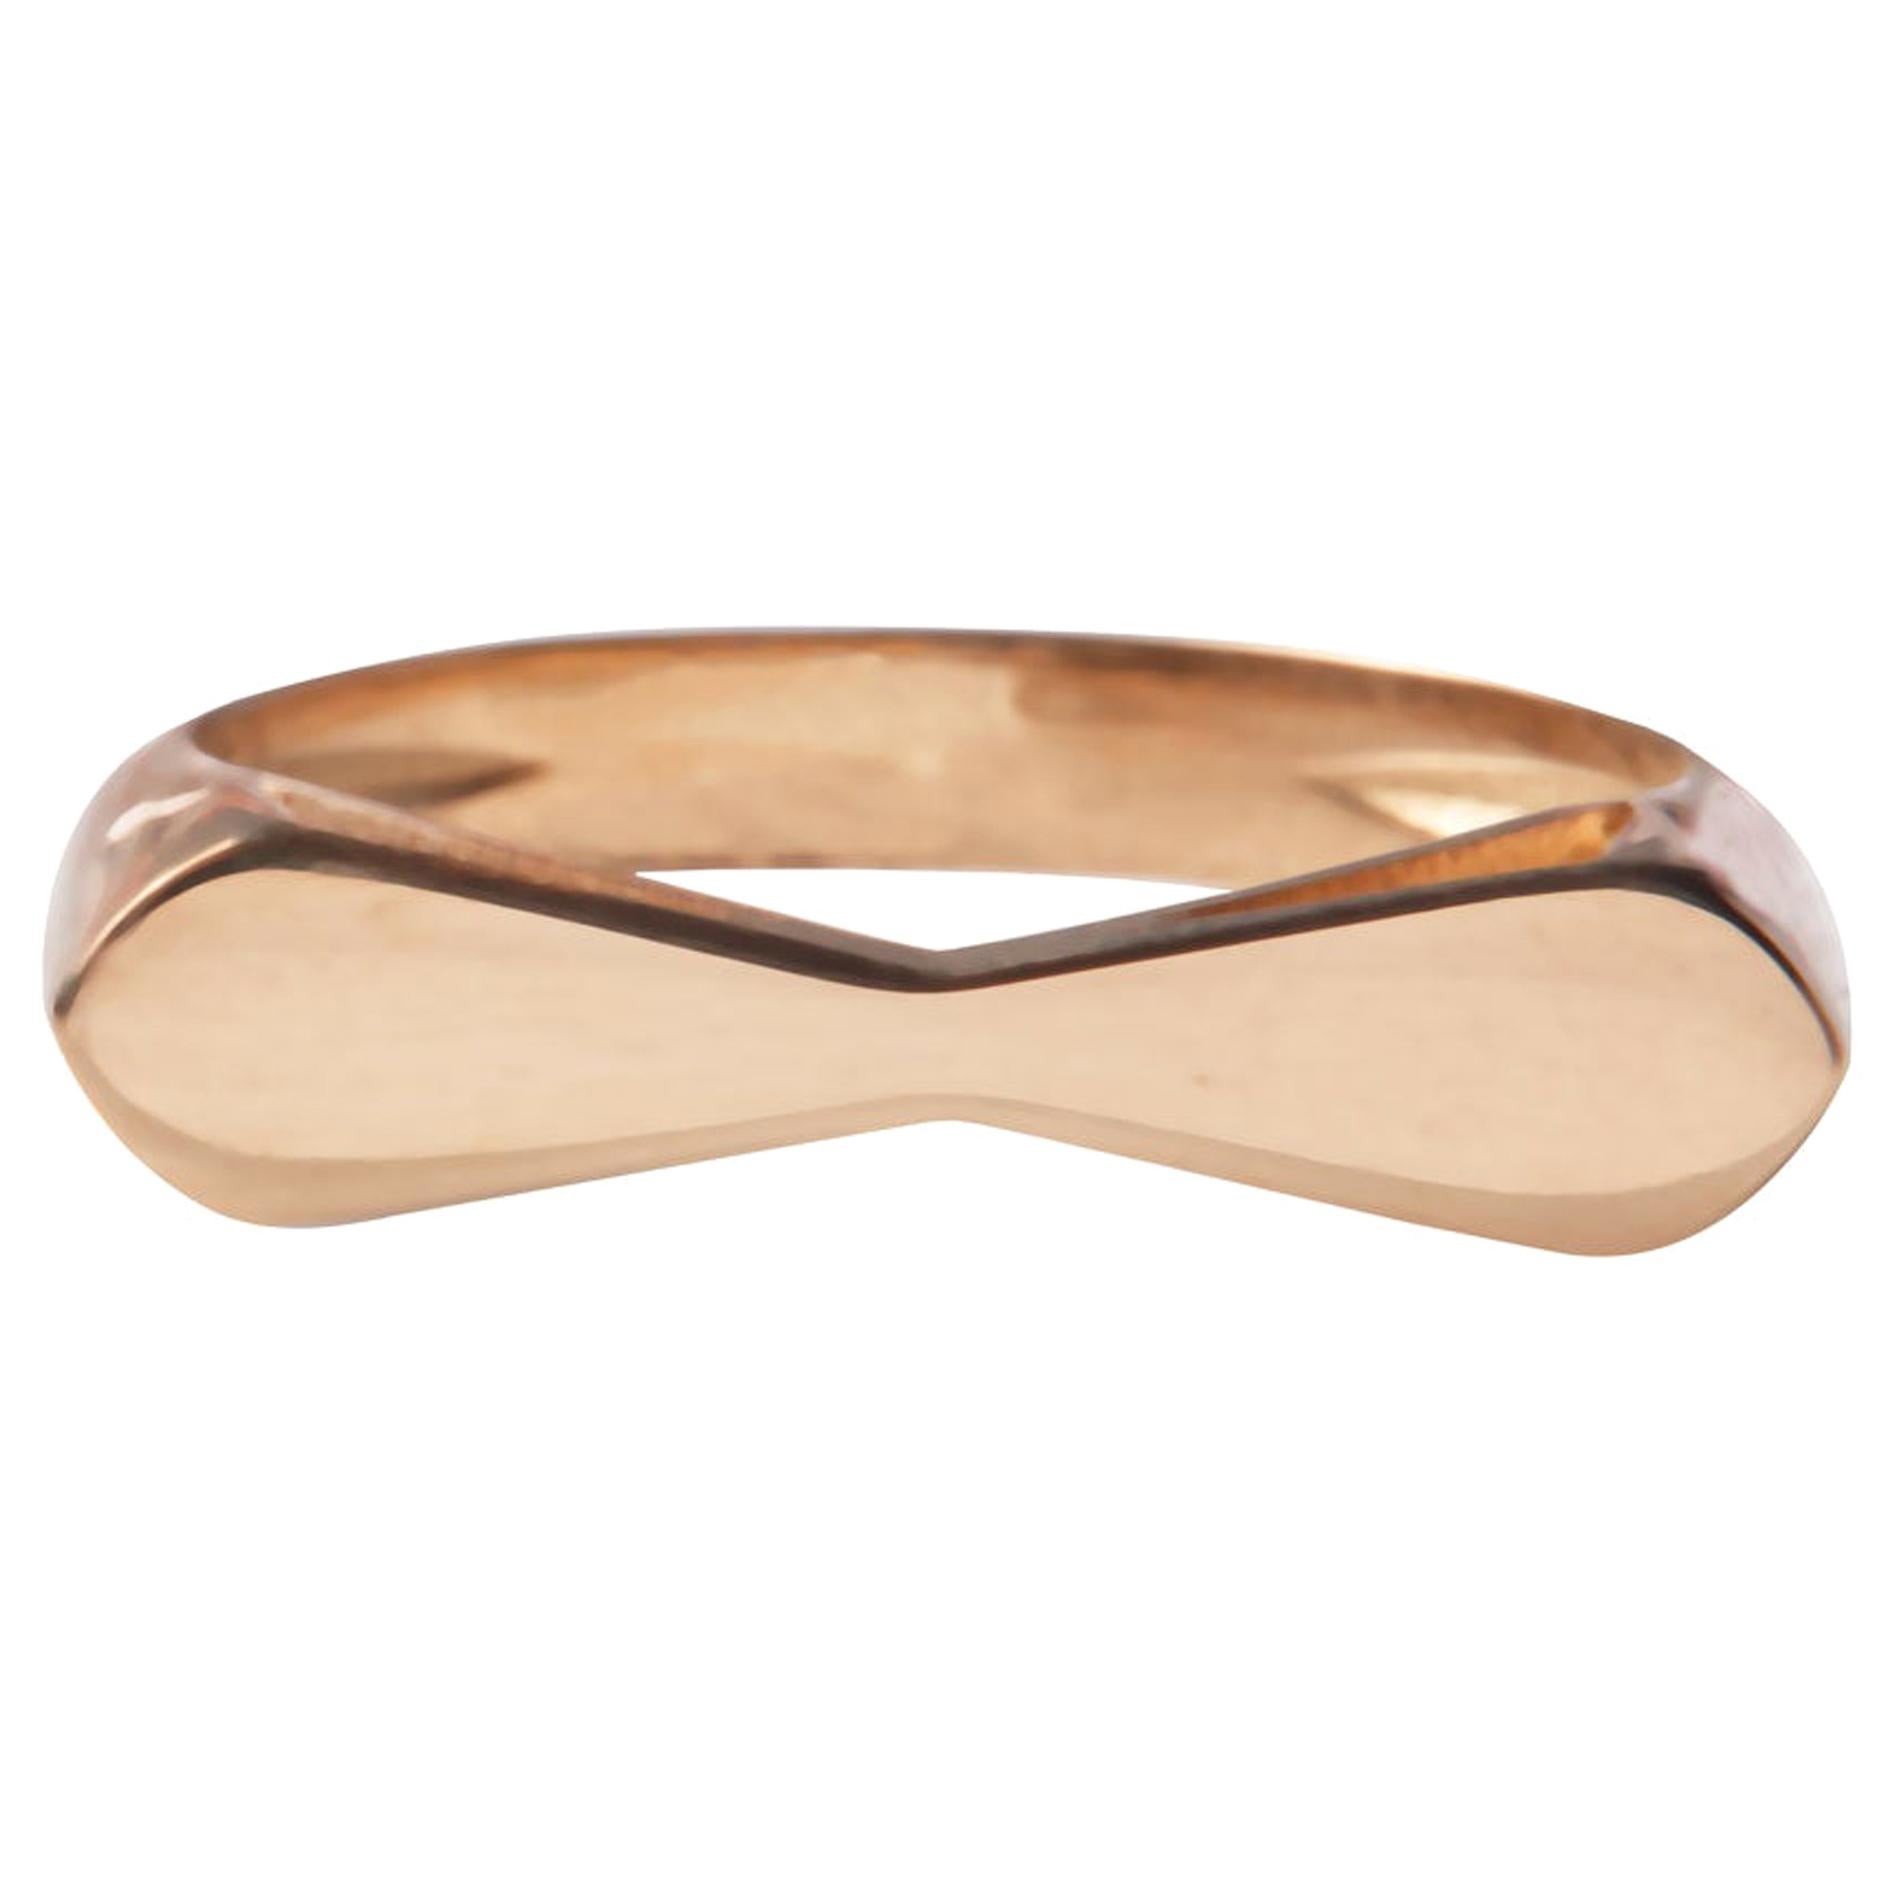 18 Karat Rose Gold Tie Ring. Sustainable Fine Jewelry For Sale